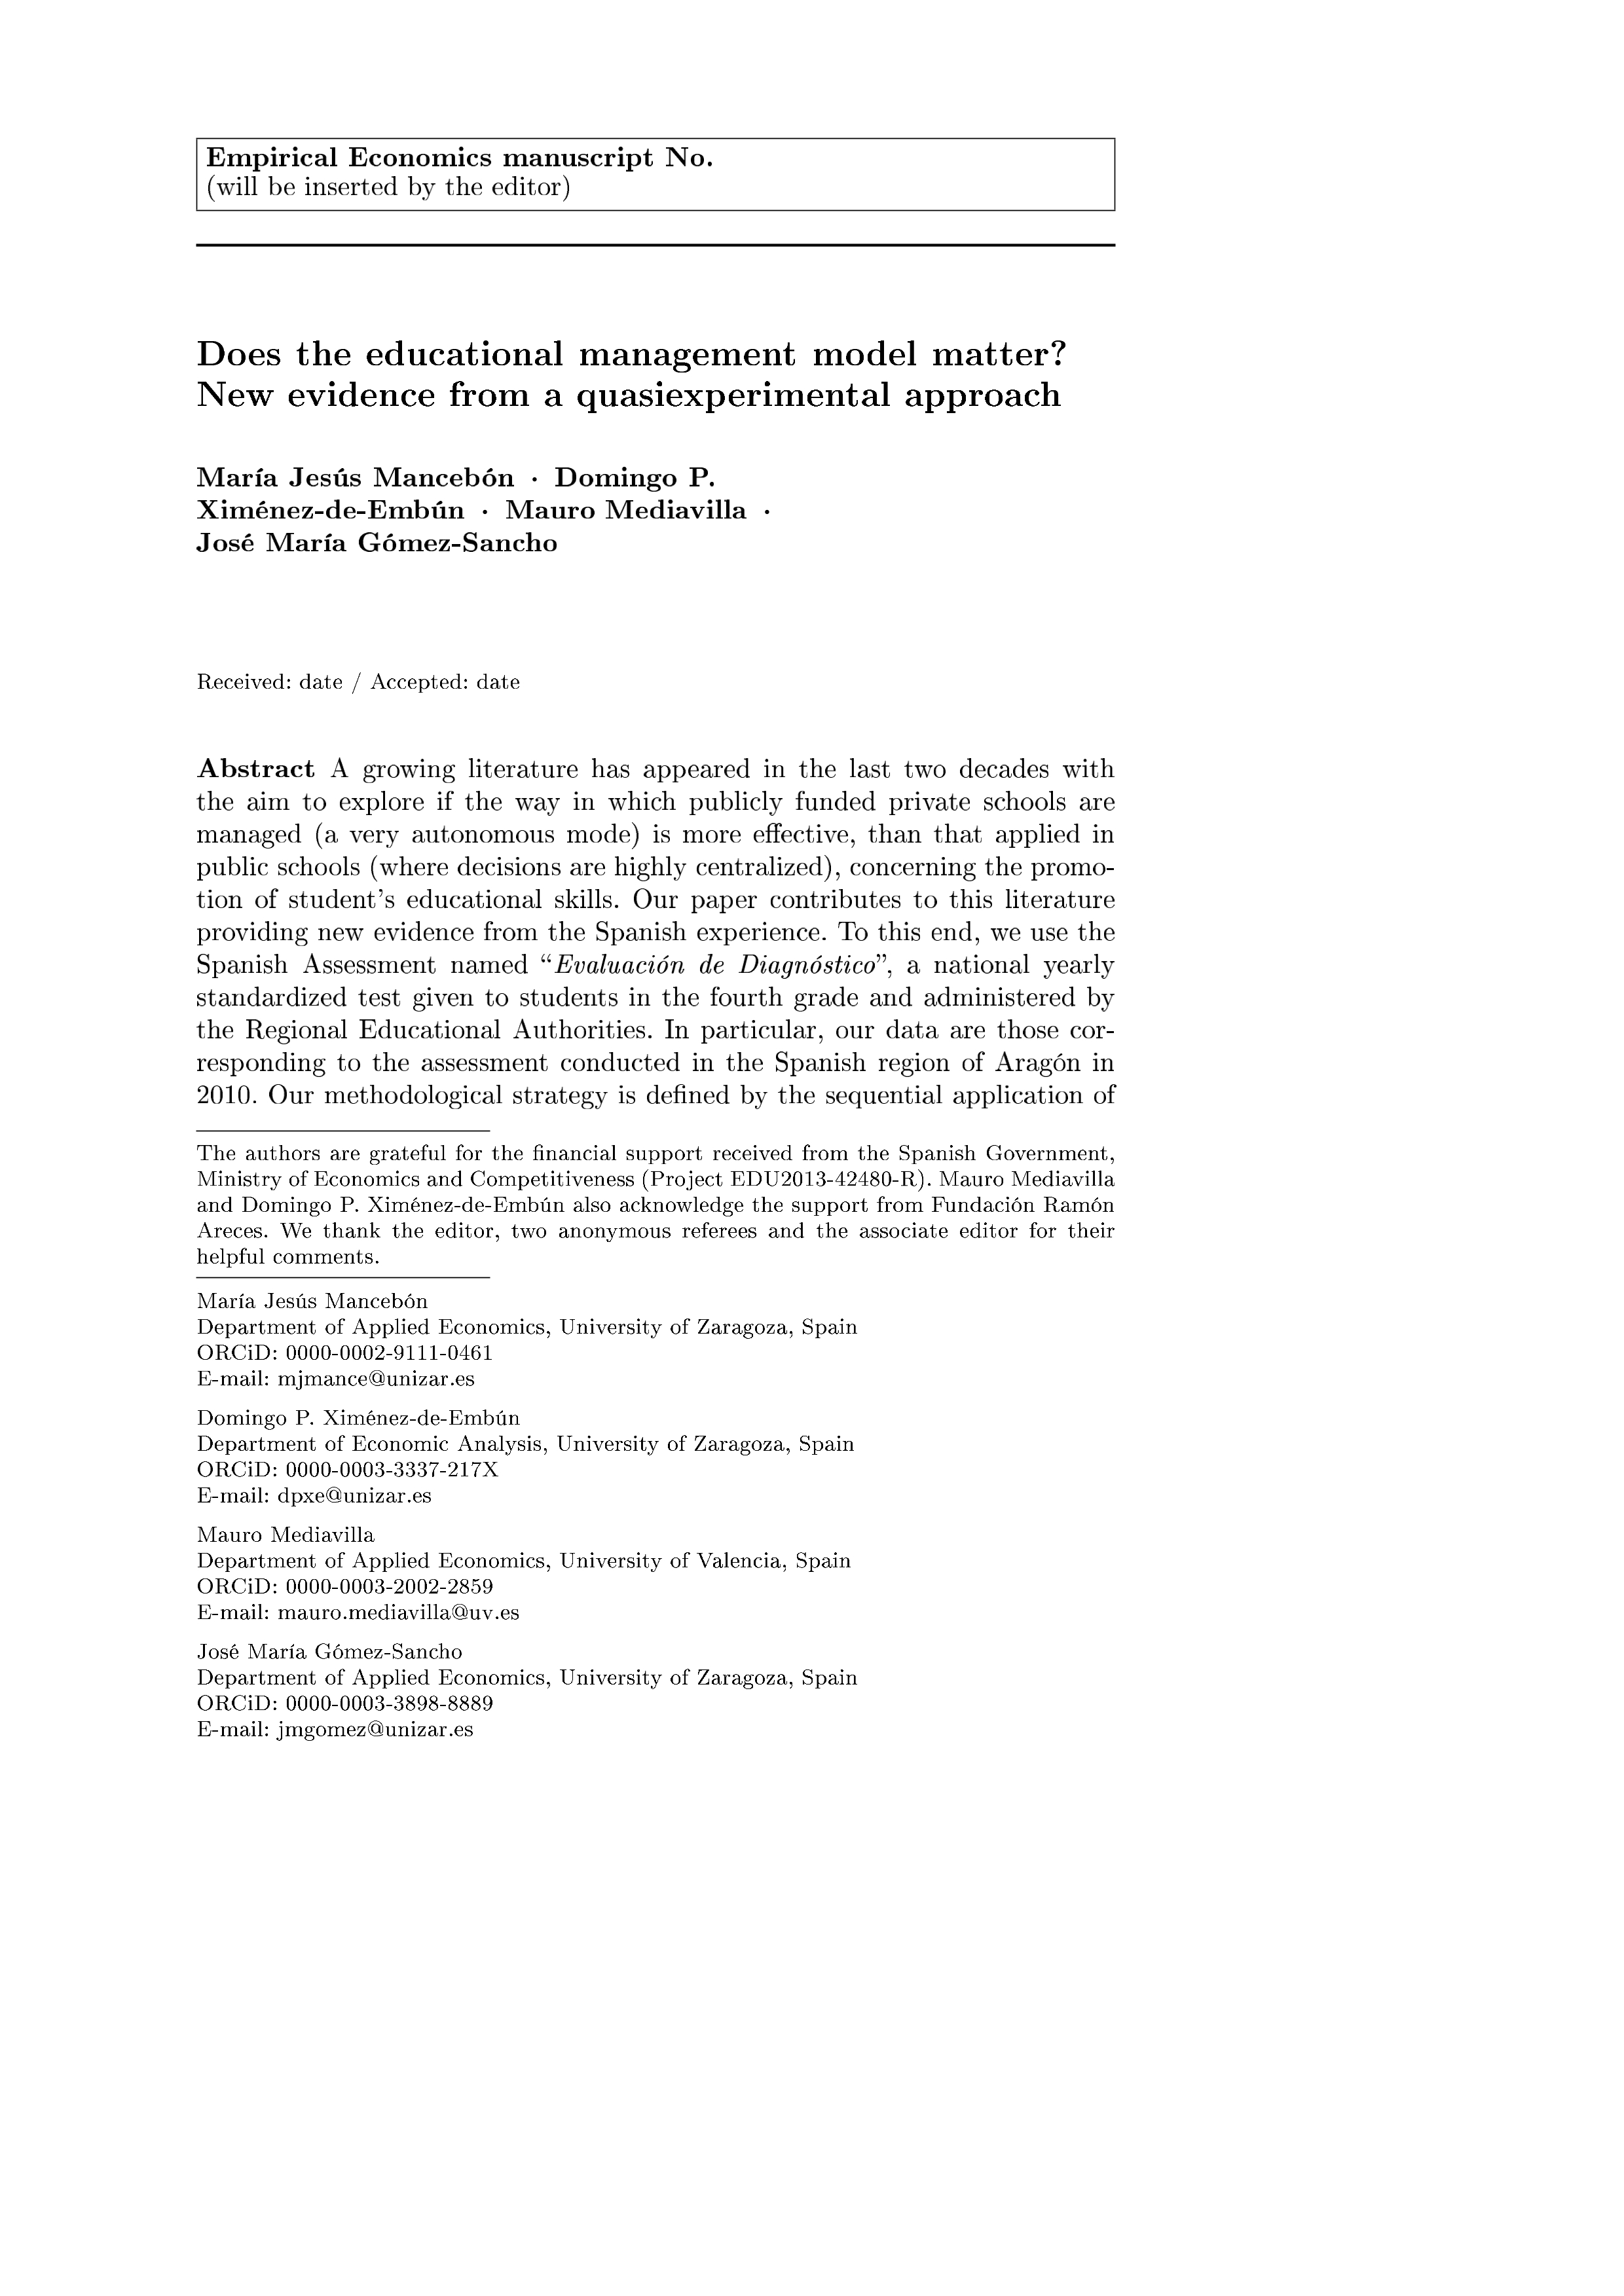 Does the educational management model matter? New evidence from a quasiexperimental approach